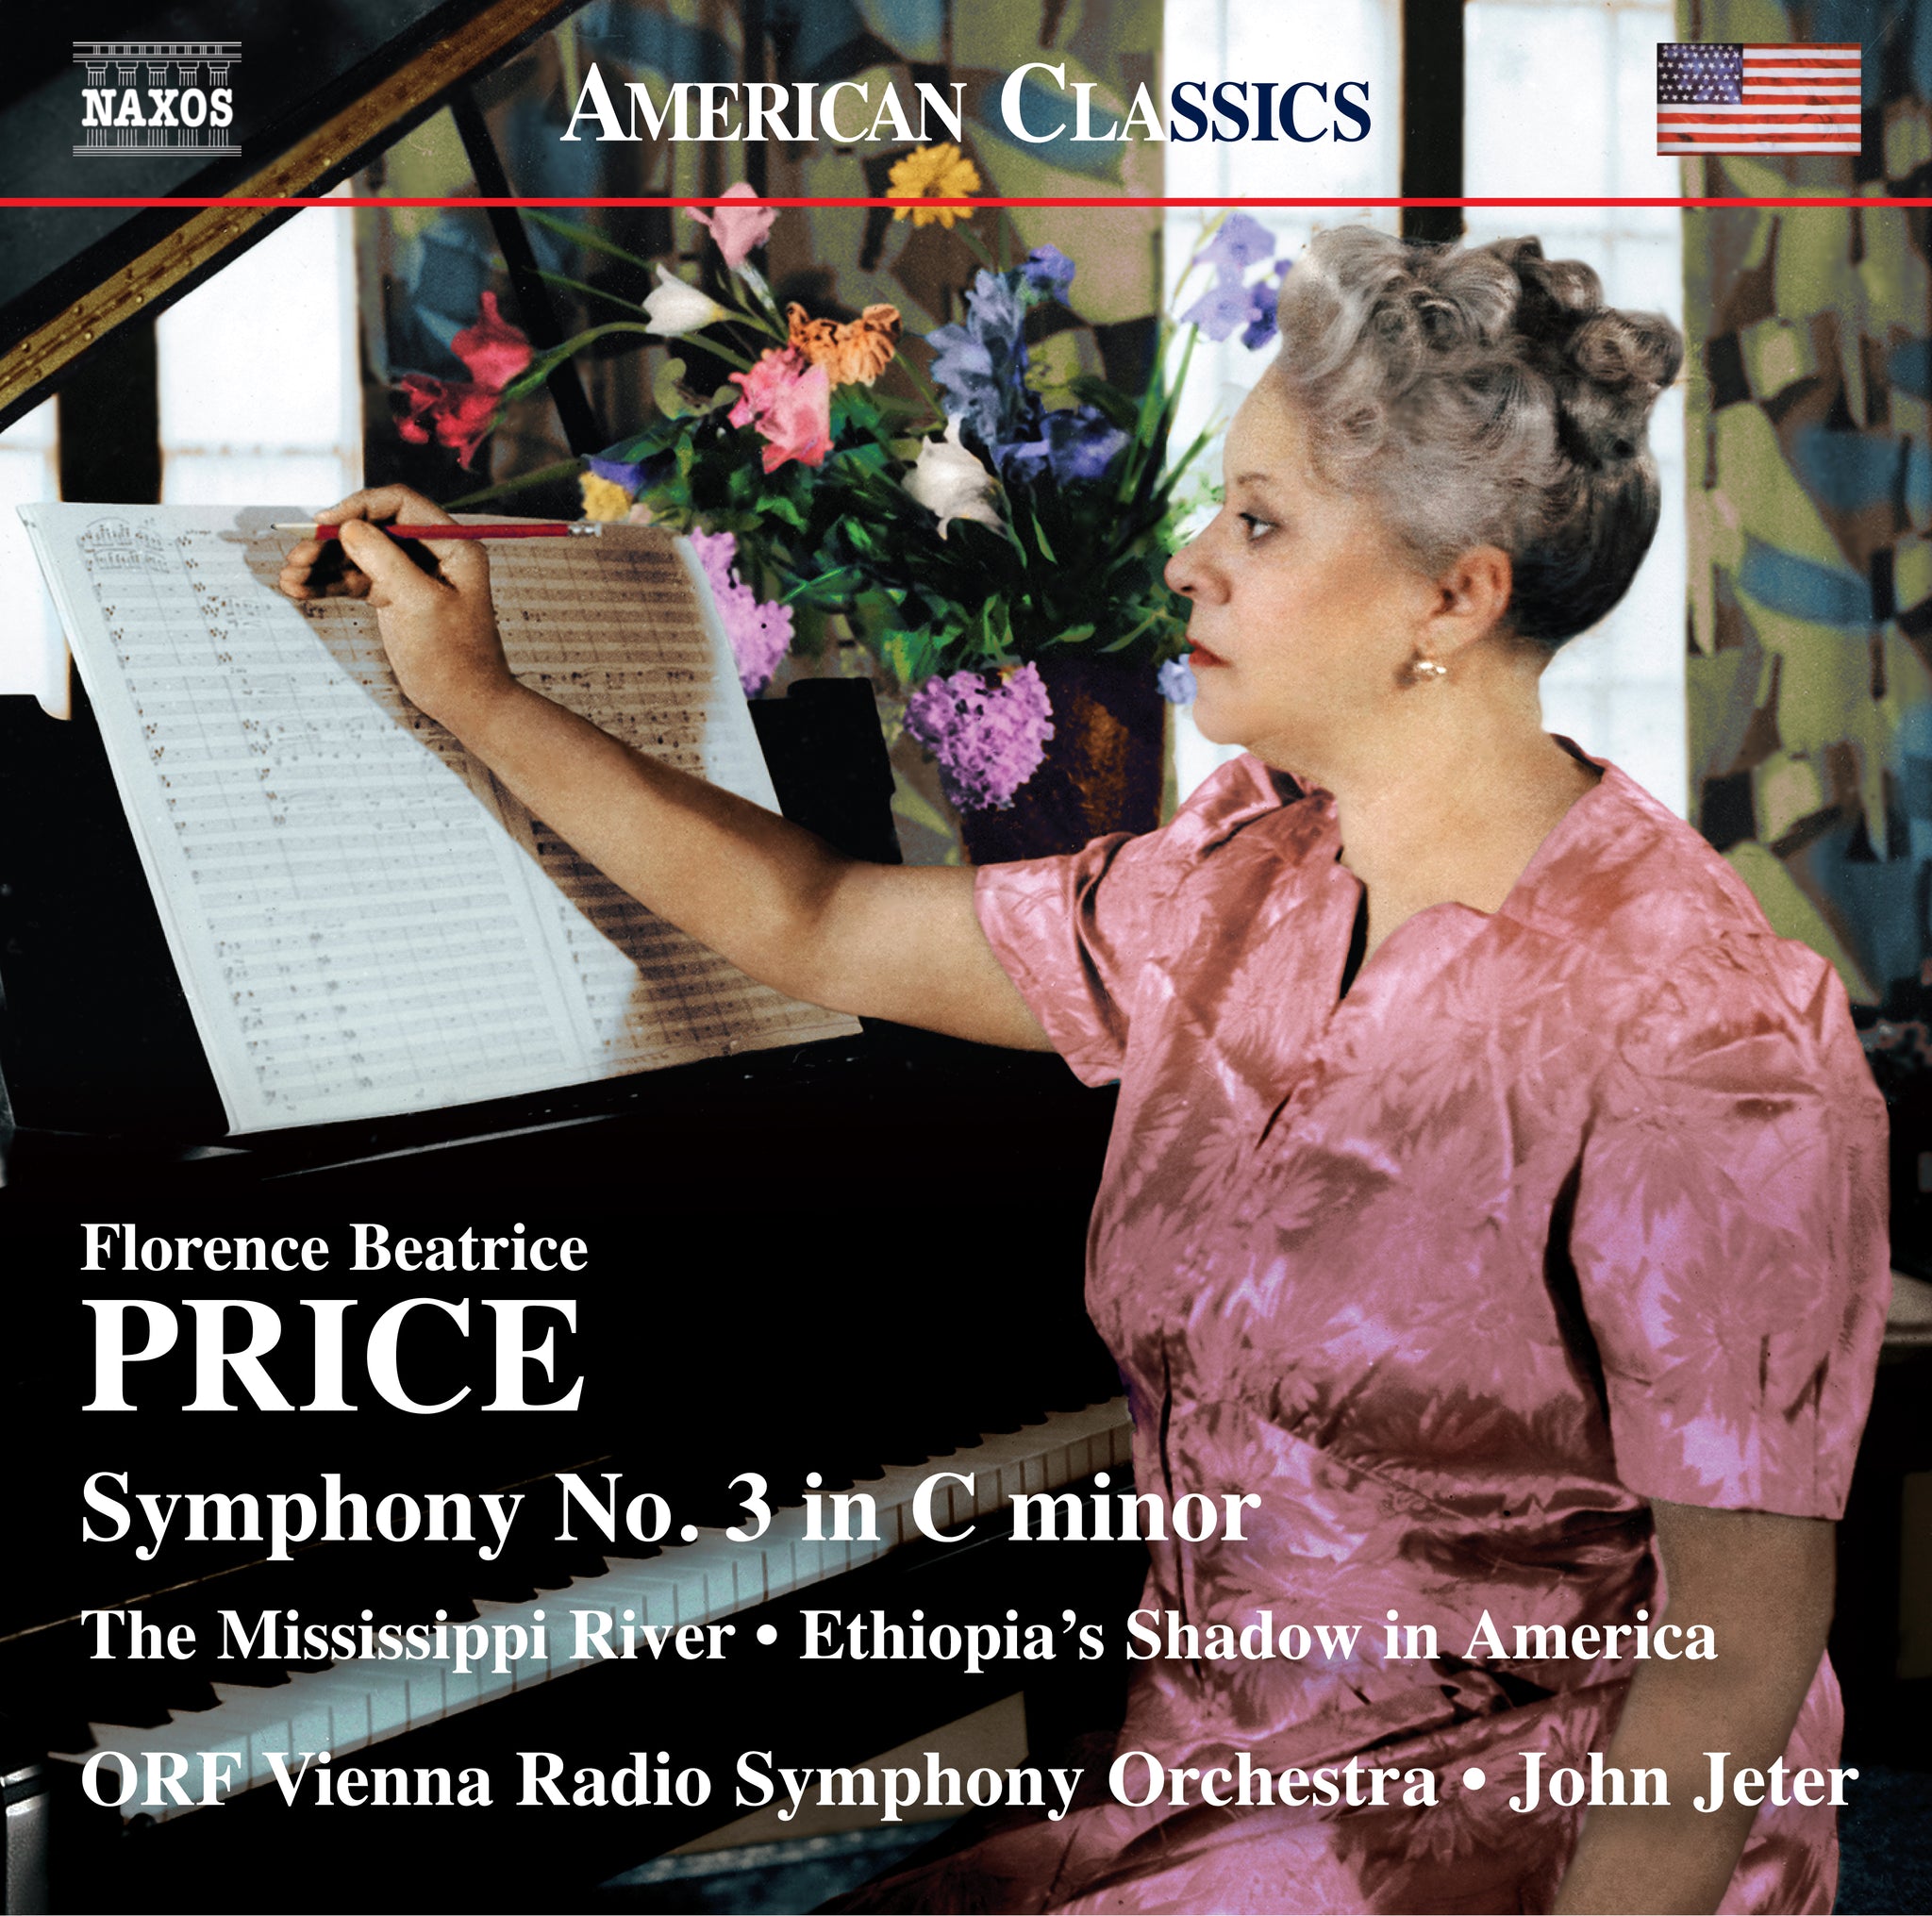 Price: Symphony No. 3 - The Mississippi River - Ethiopia's Shadow in America / Jeter, ORF VRSO